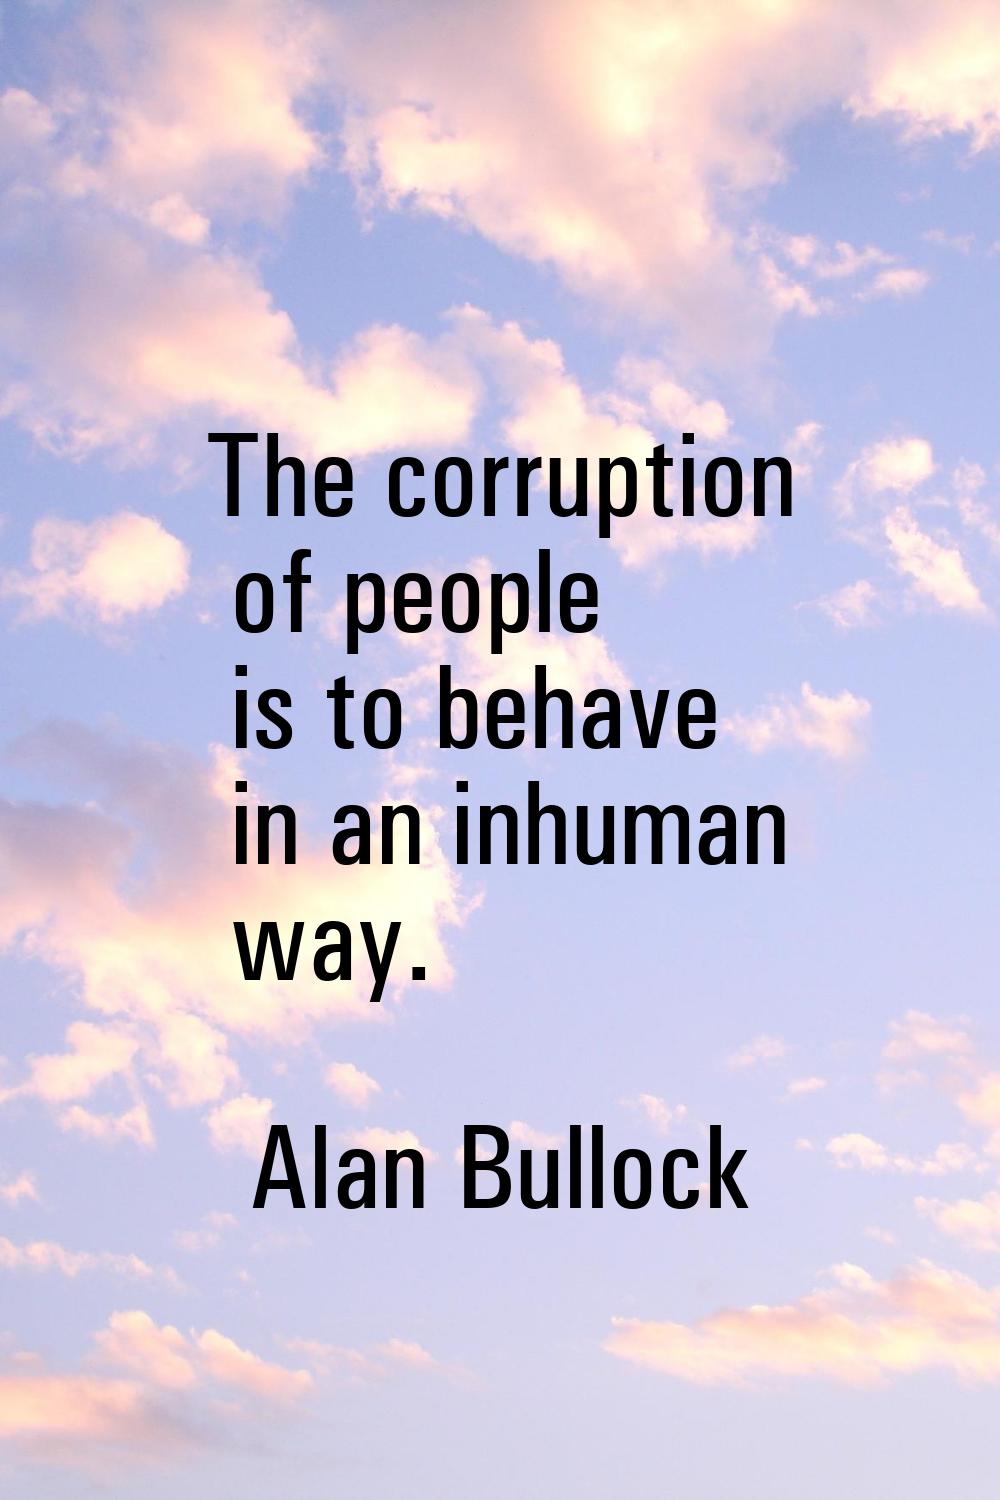 The corruption of people is to behave in an inhuman way.